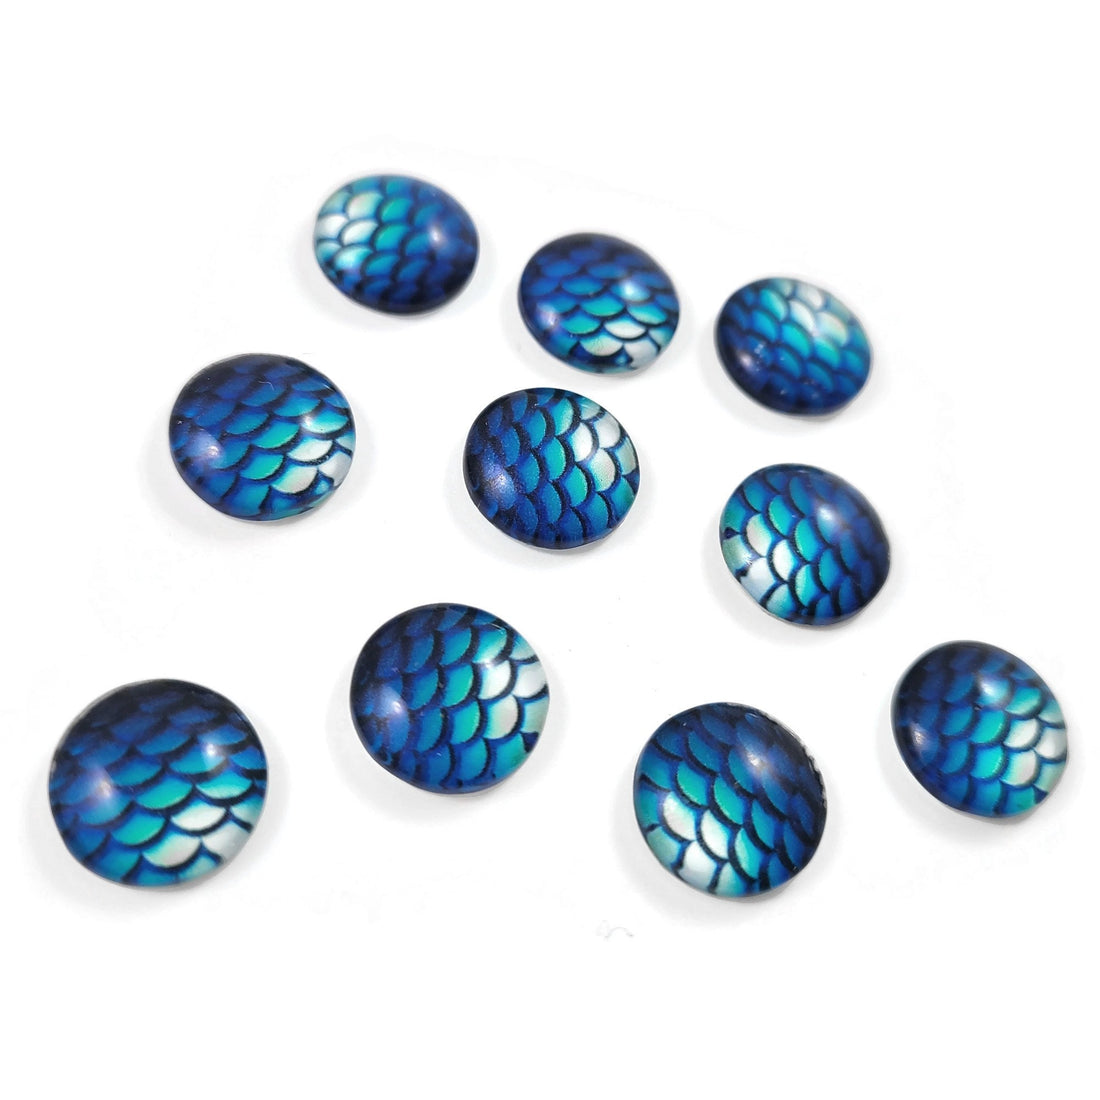 Mermaid glass cabochons, 12mm flat round domed cabochons, Set of 10, Jewelry making